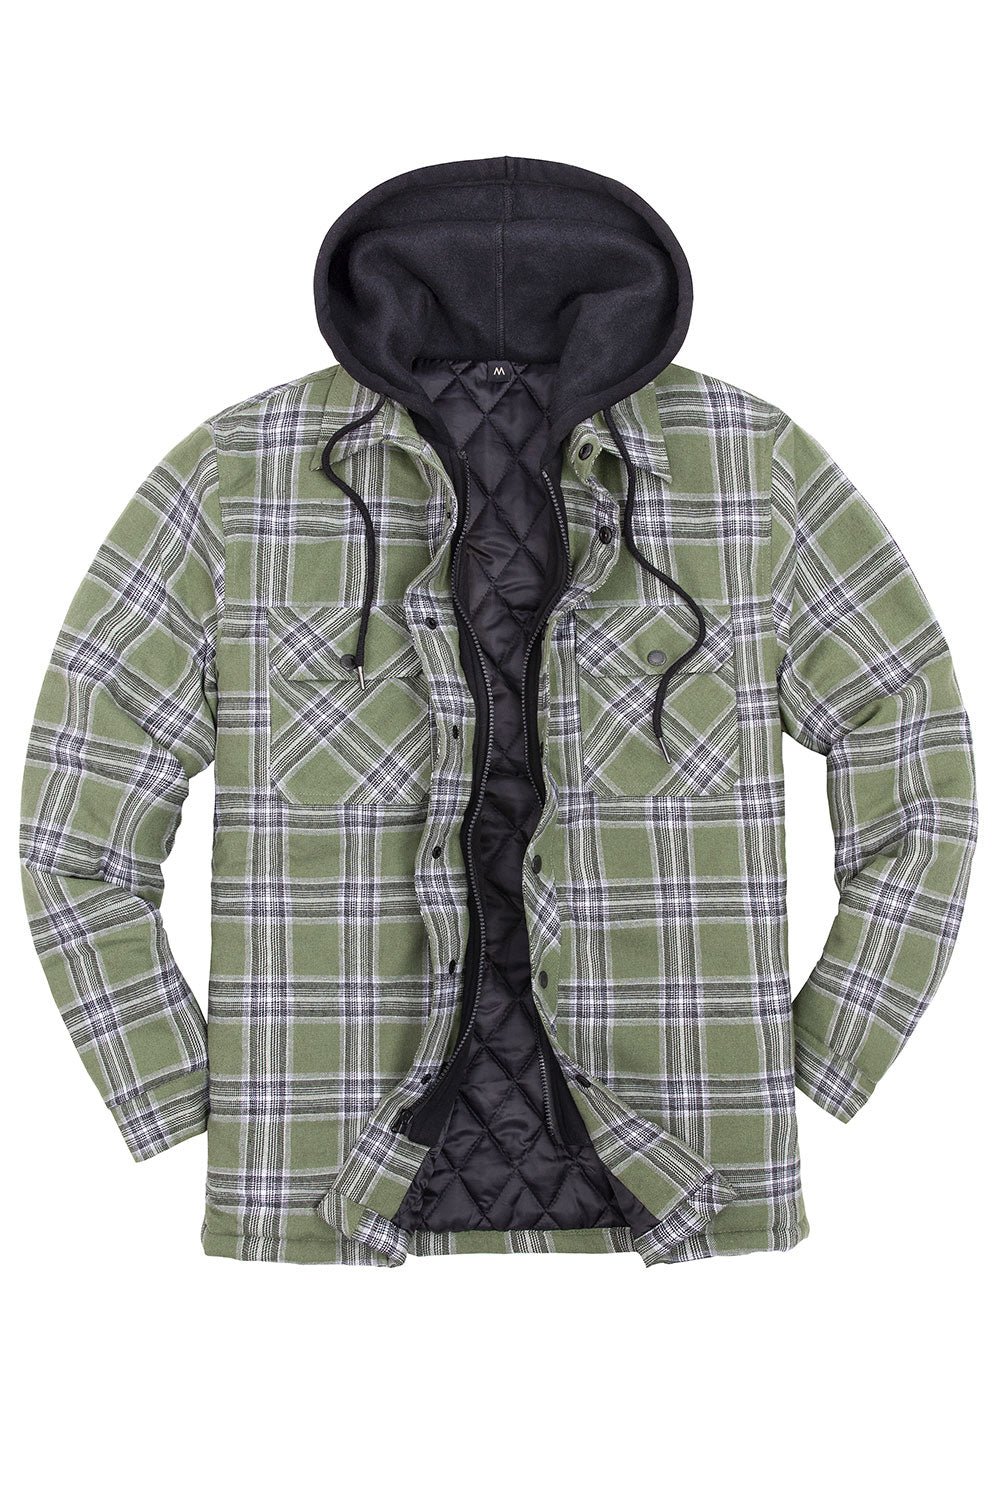 Men's Thicken Plaid Hooded Flannel Shirt Jacket with Quilted Lined